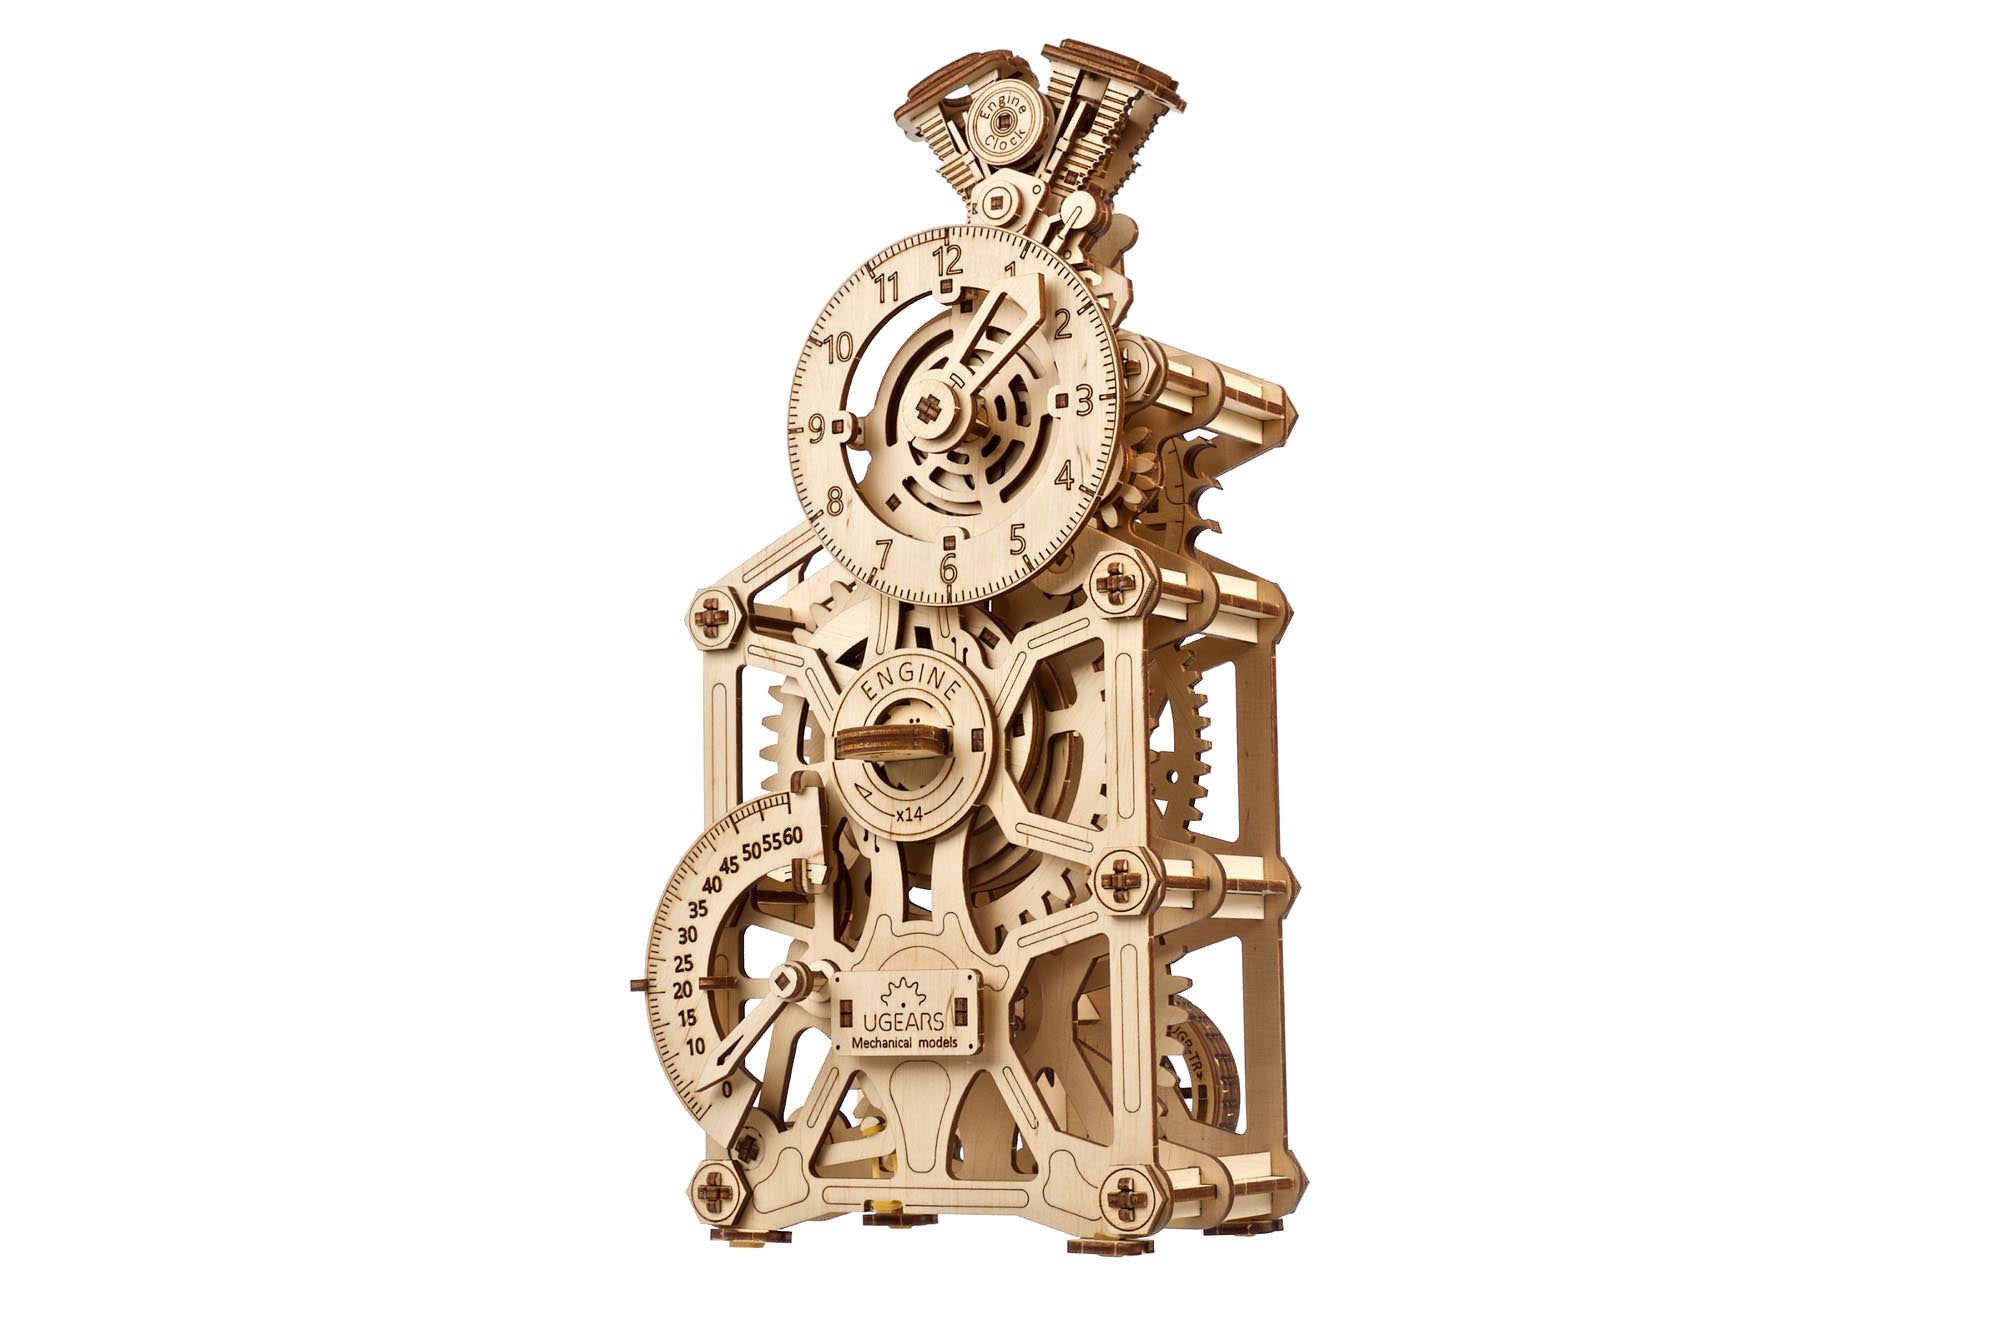 UGears Engine Clock 3D Puzzle - Wooden Model Kits for Adults – 3D Wooden Models to Build - DIY Mechanical Wooden Pendulum Clock Puzzle with Moving